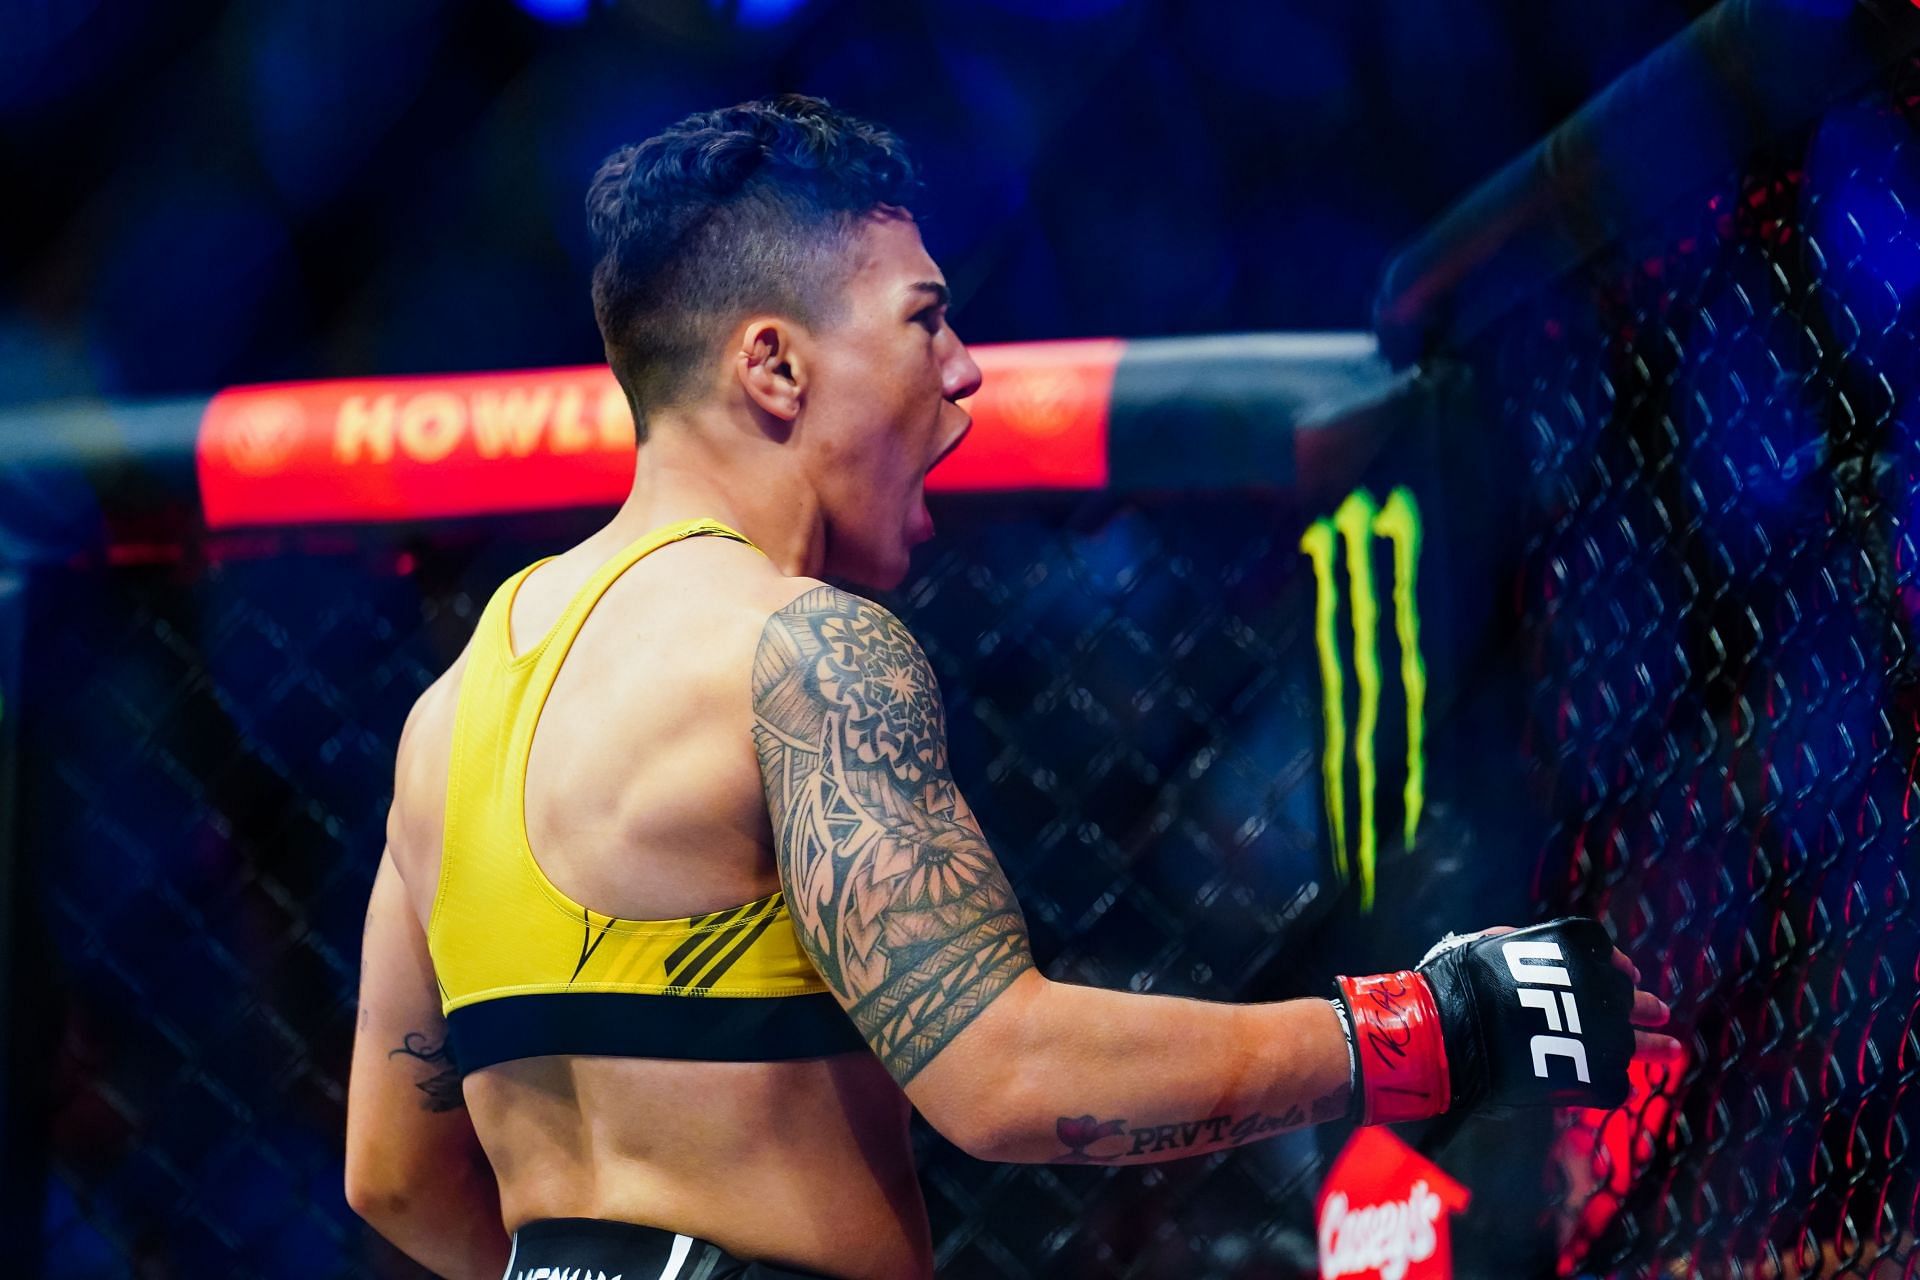 Andrade defeated Lemos via first-round submission